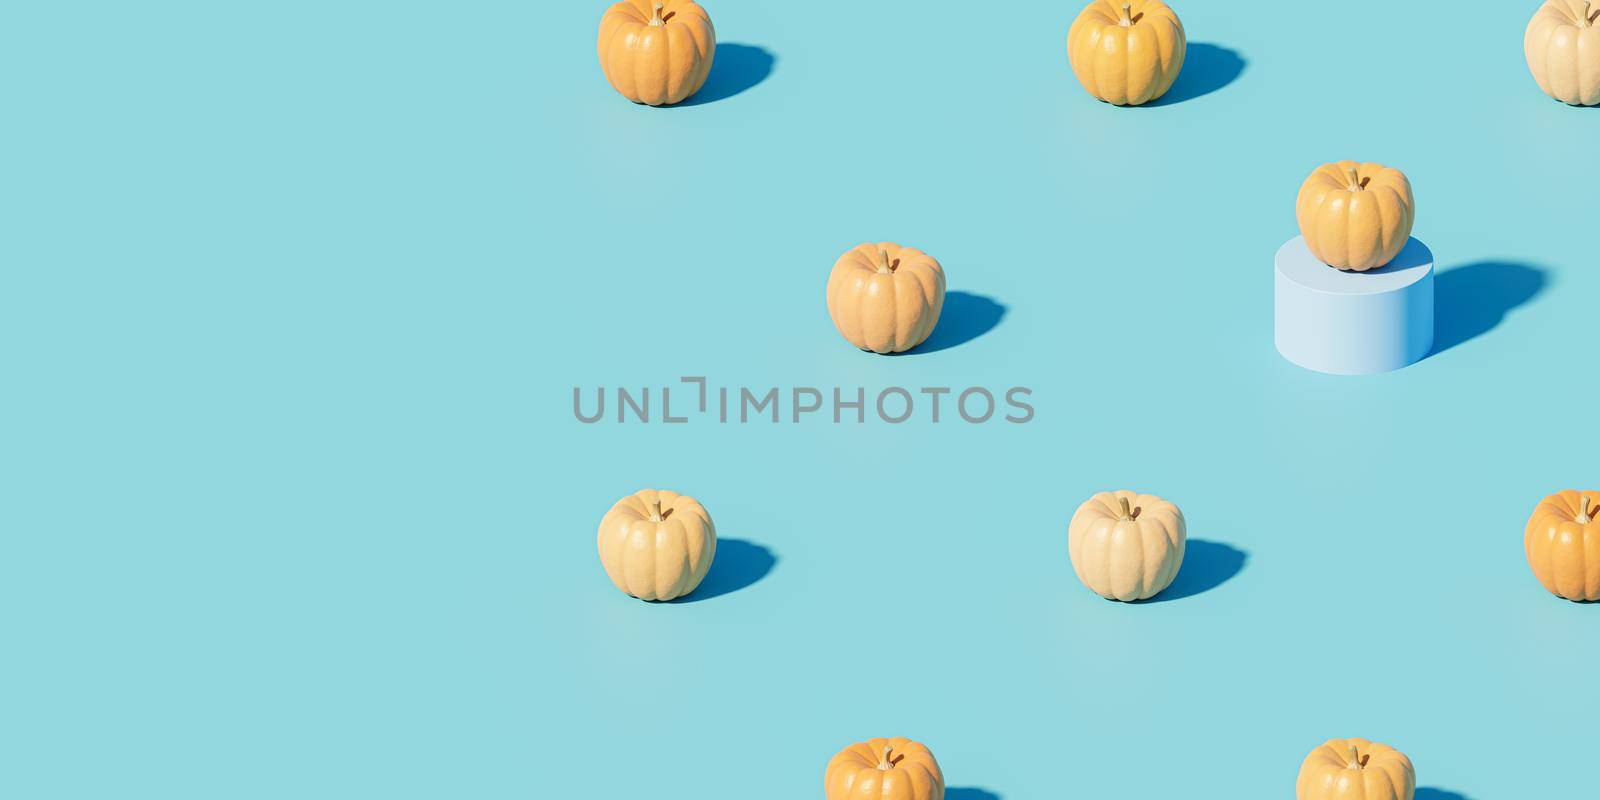 Pumpkins on blue background for advertising on autumn holidays or sales, copy space, 3d render